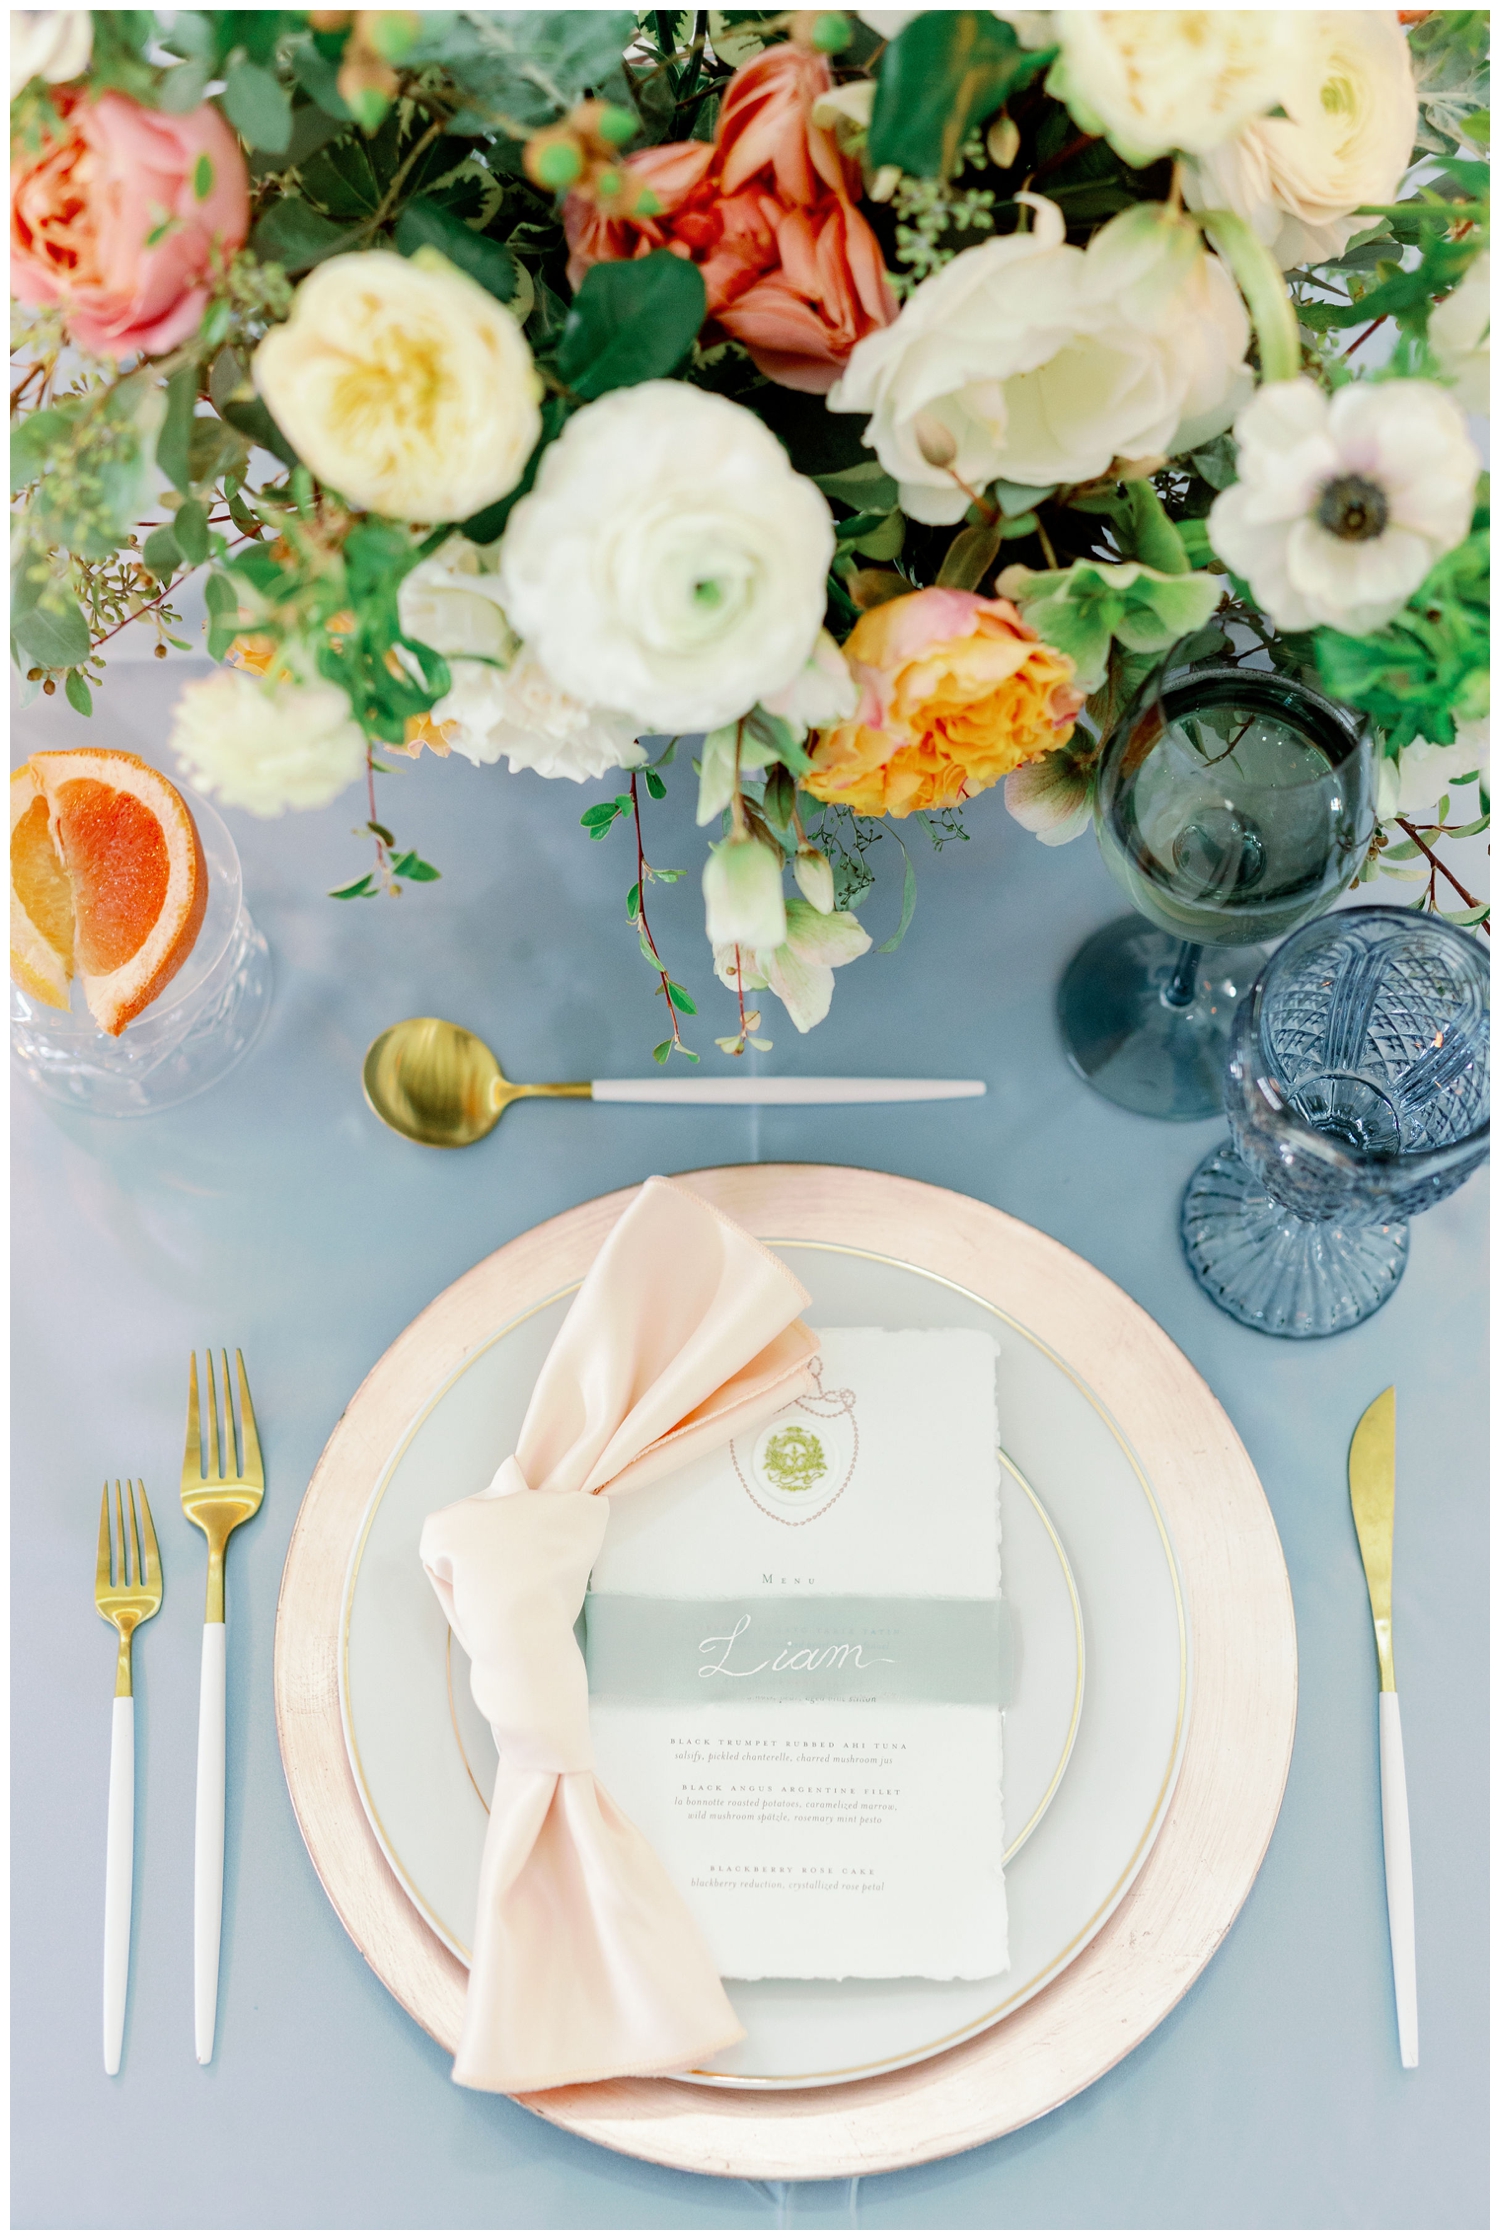 reception table details with white and gold flatware and blush placesetting he Farmhouse Wedding and Event Venue